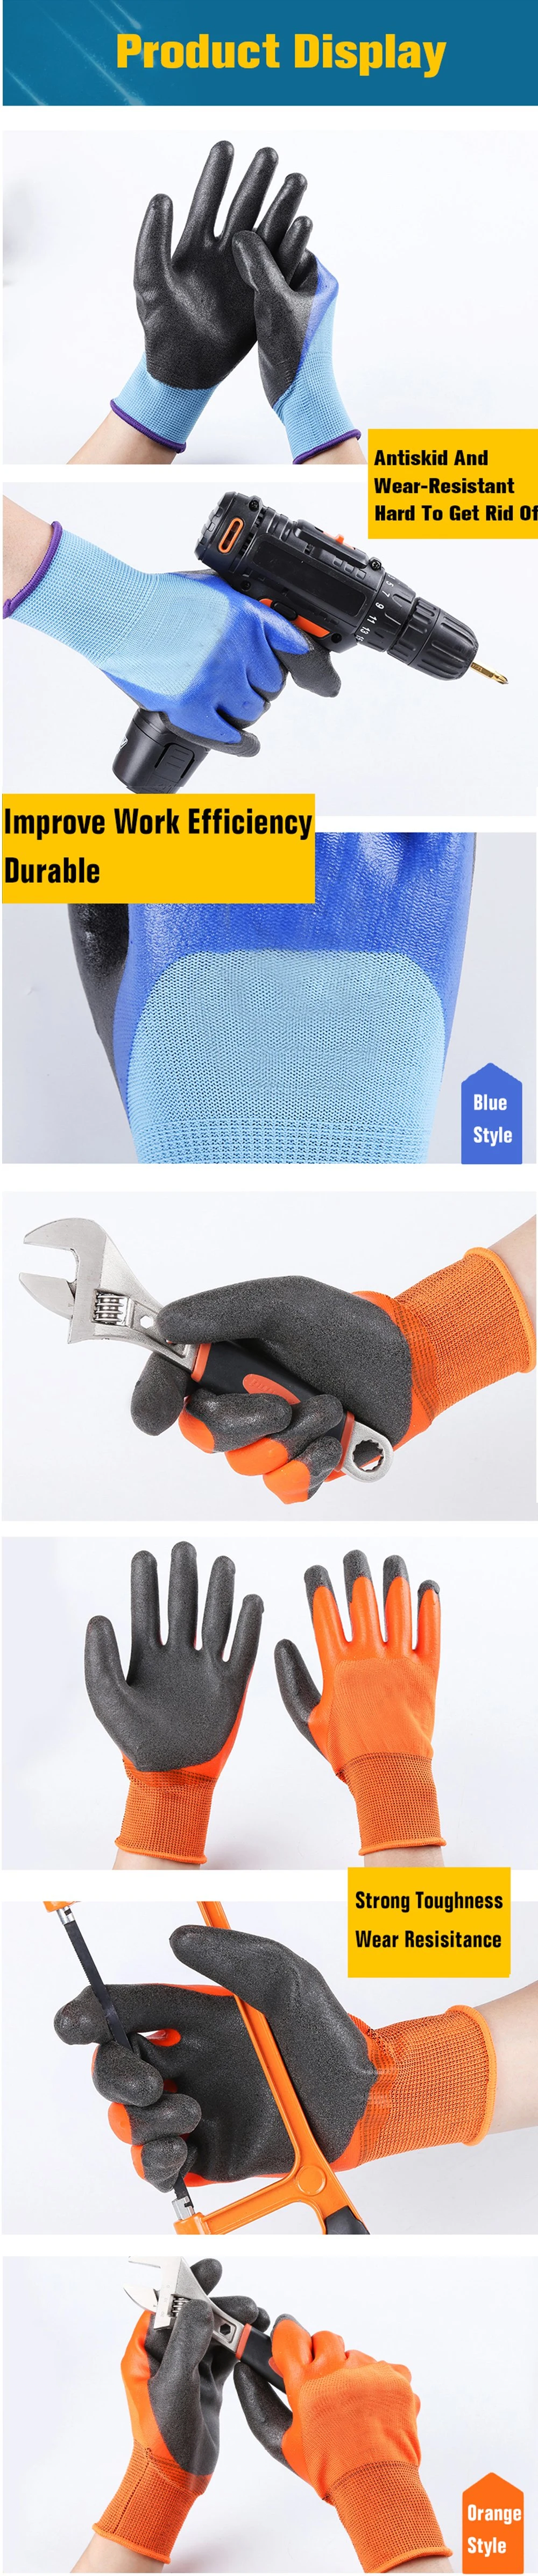 Double-Layer Dipped Nitrile Coating Anti-Puncture and Anti-Scratch Five-Stage Anti-Cutting Gloves